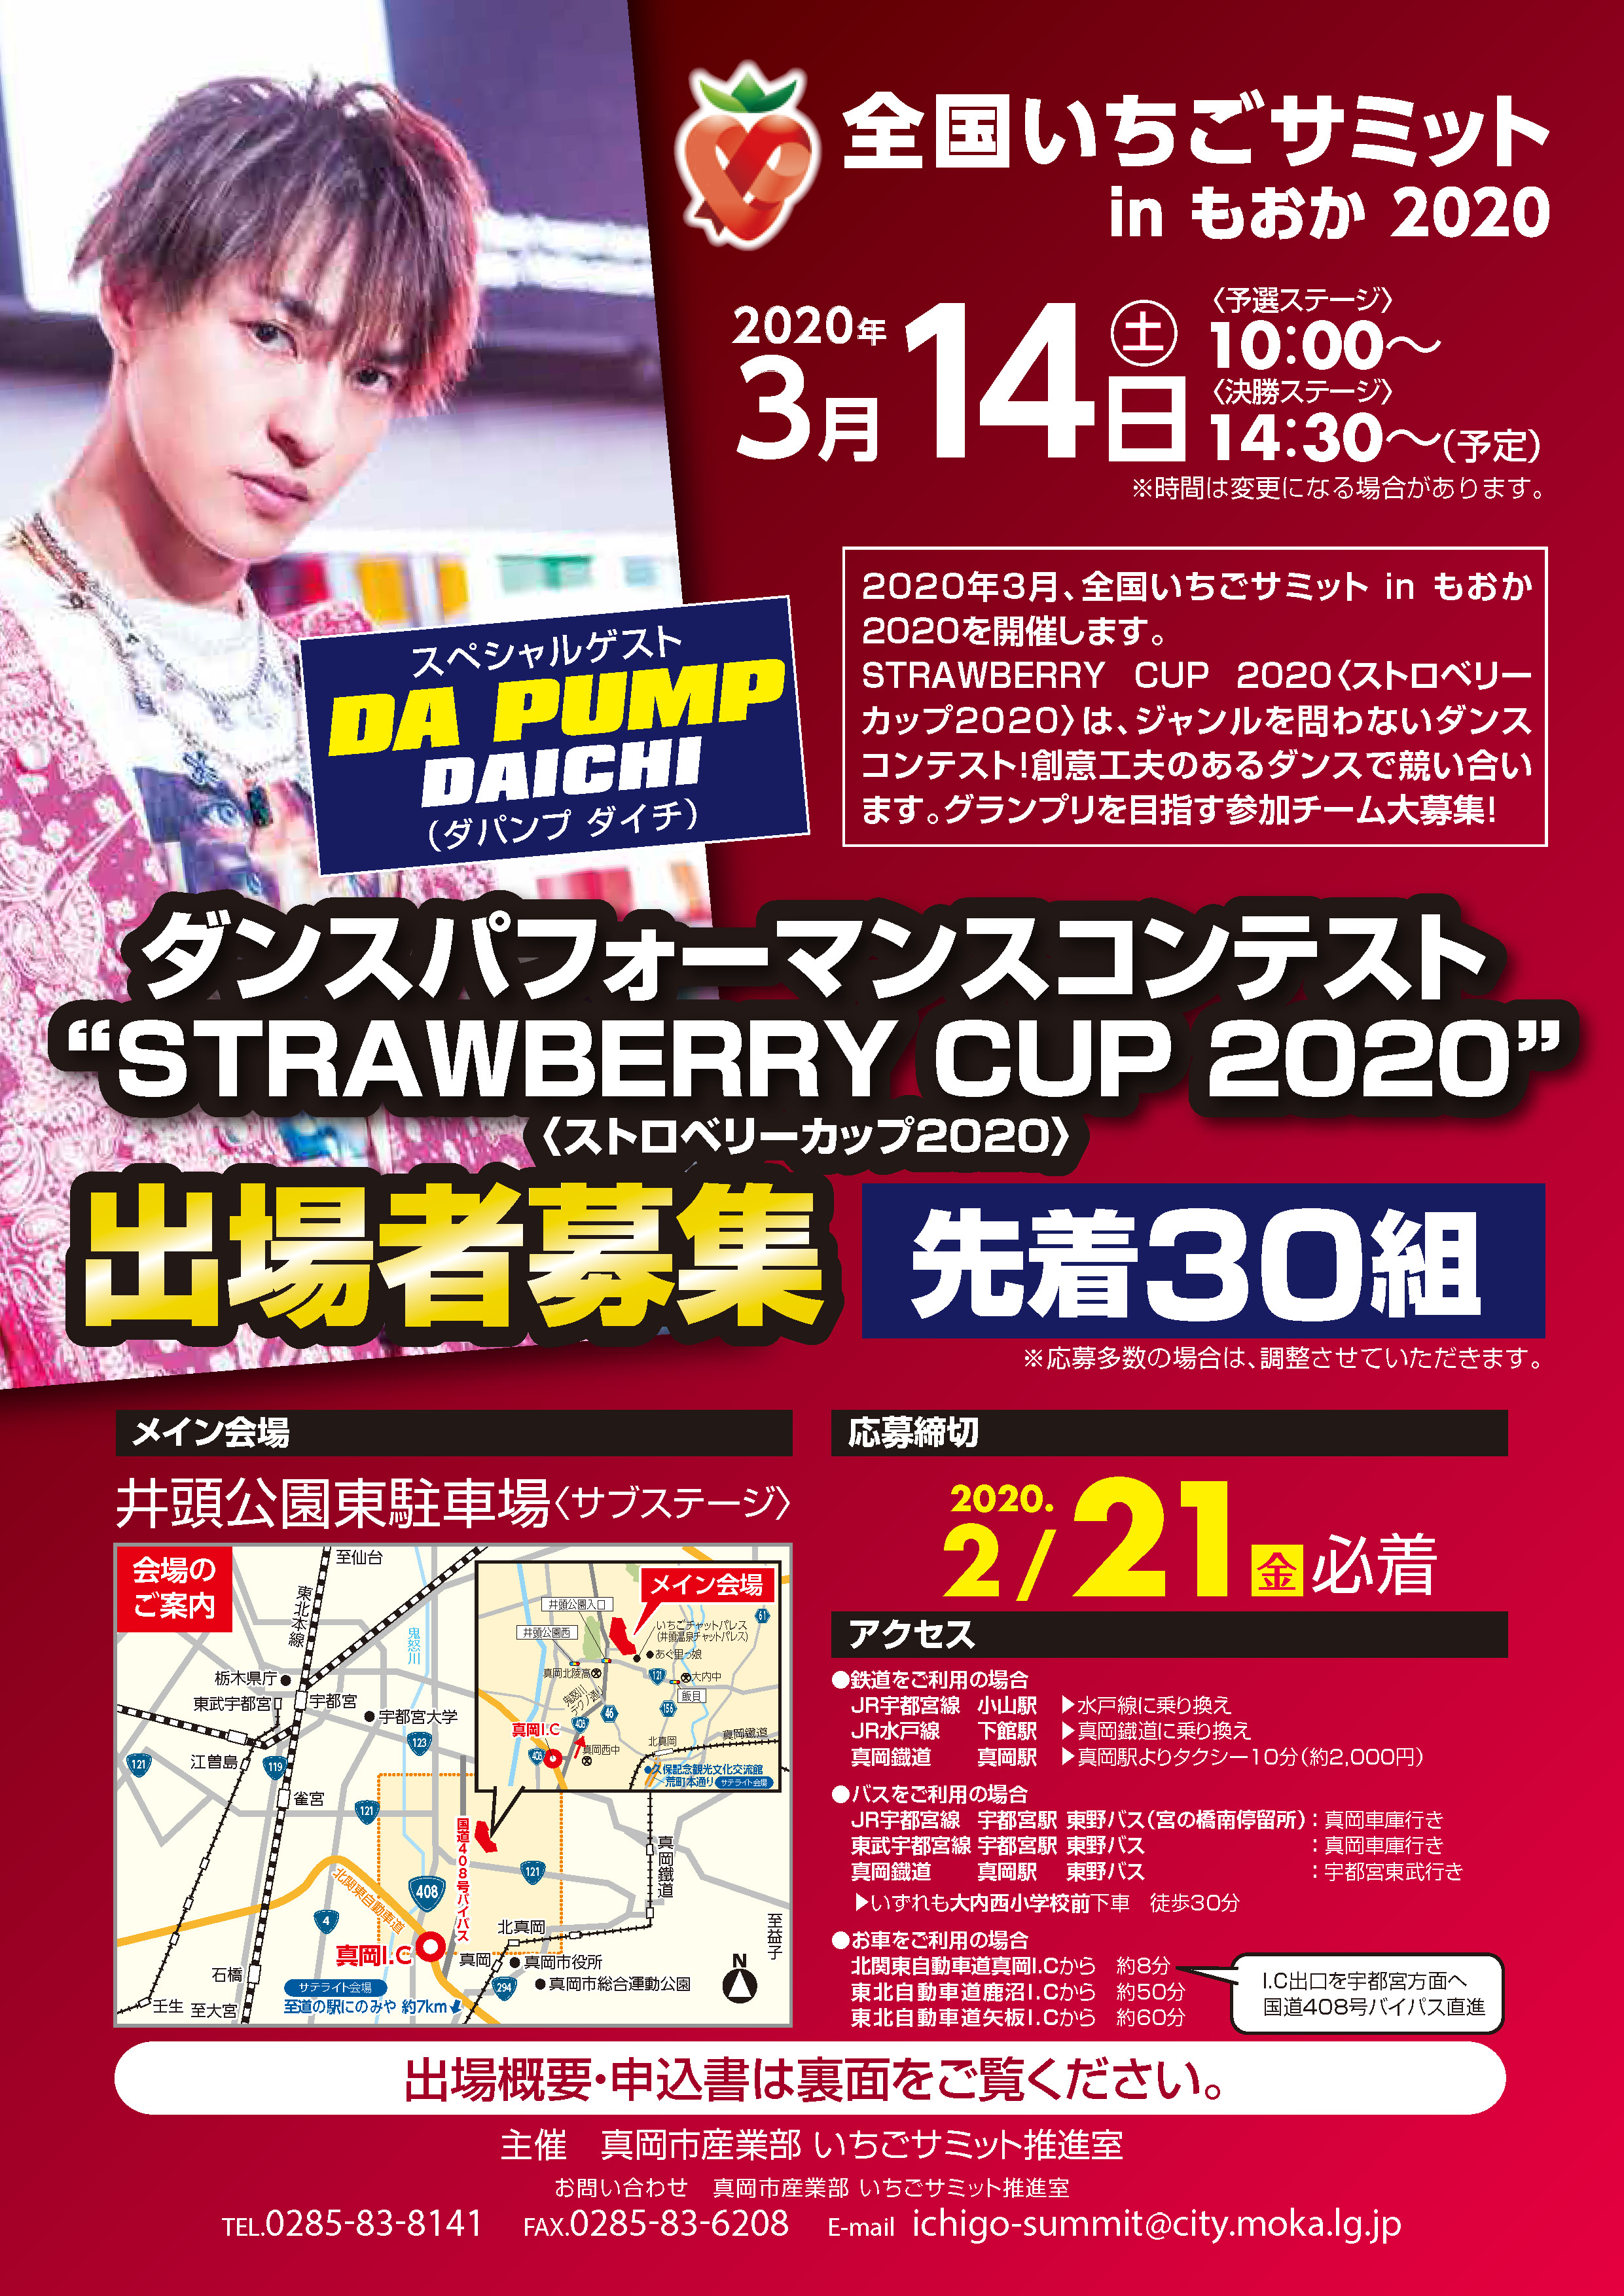 Strawberry Cup 2020